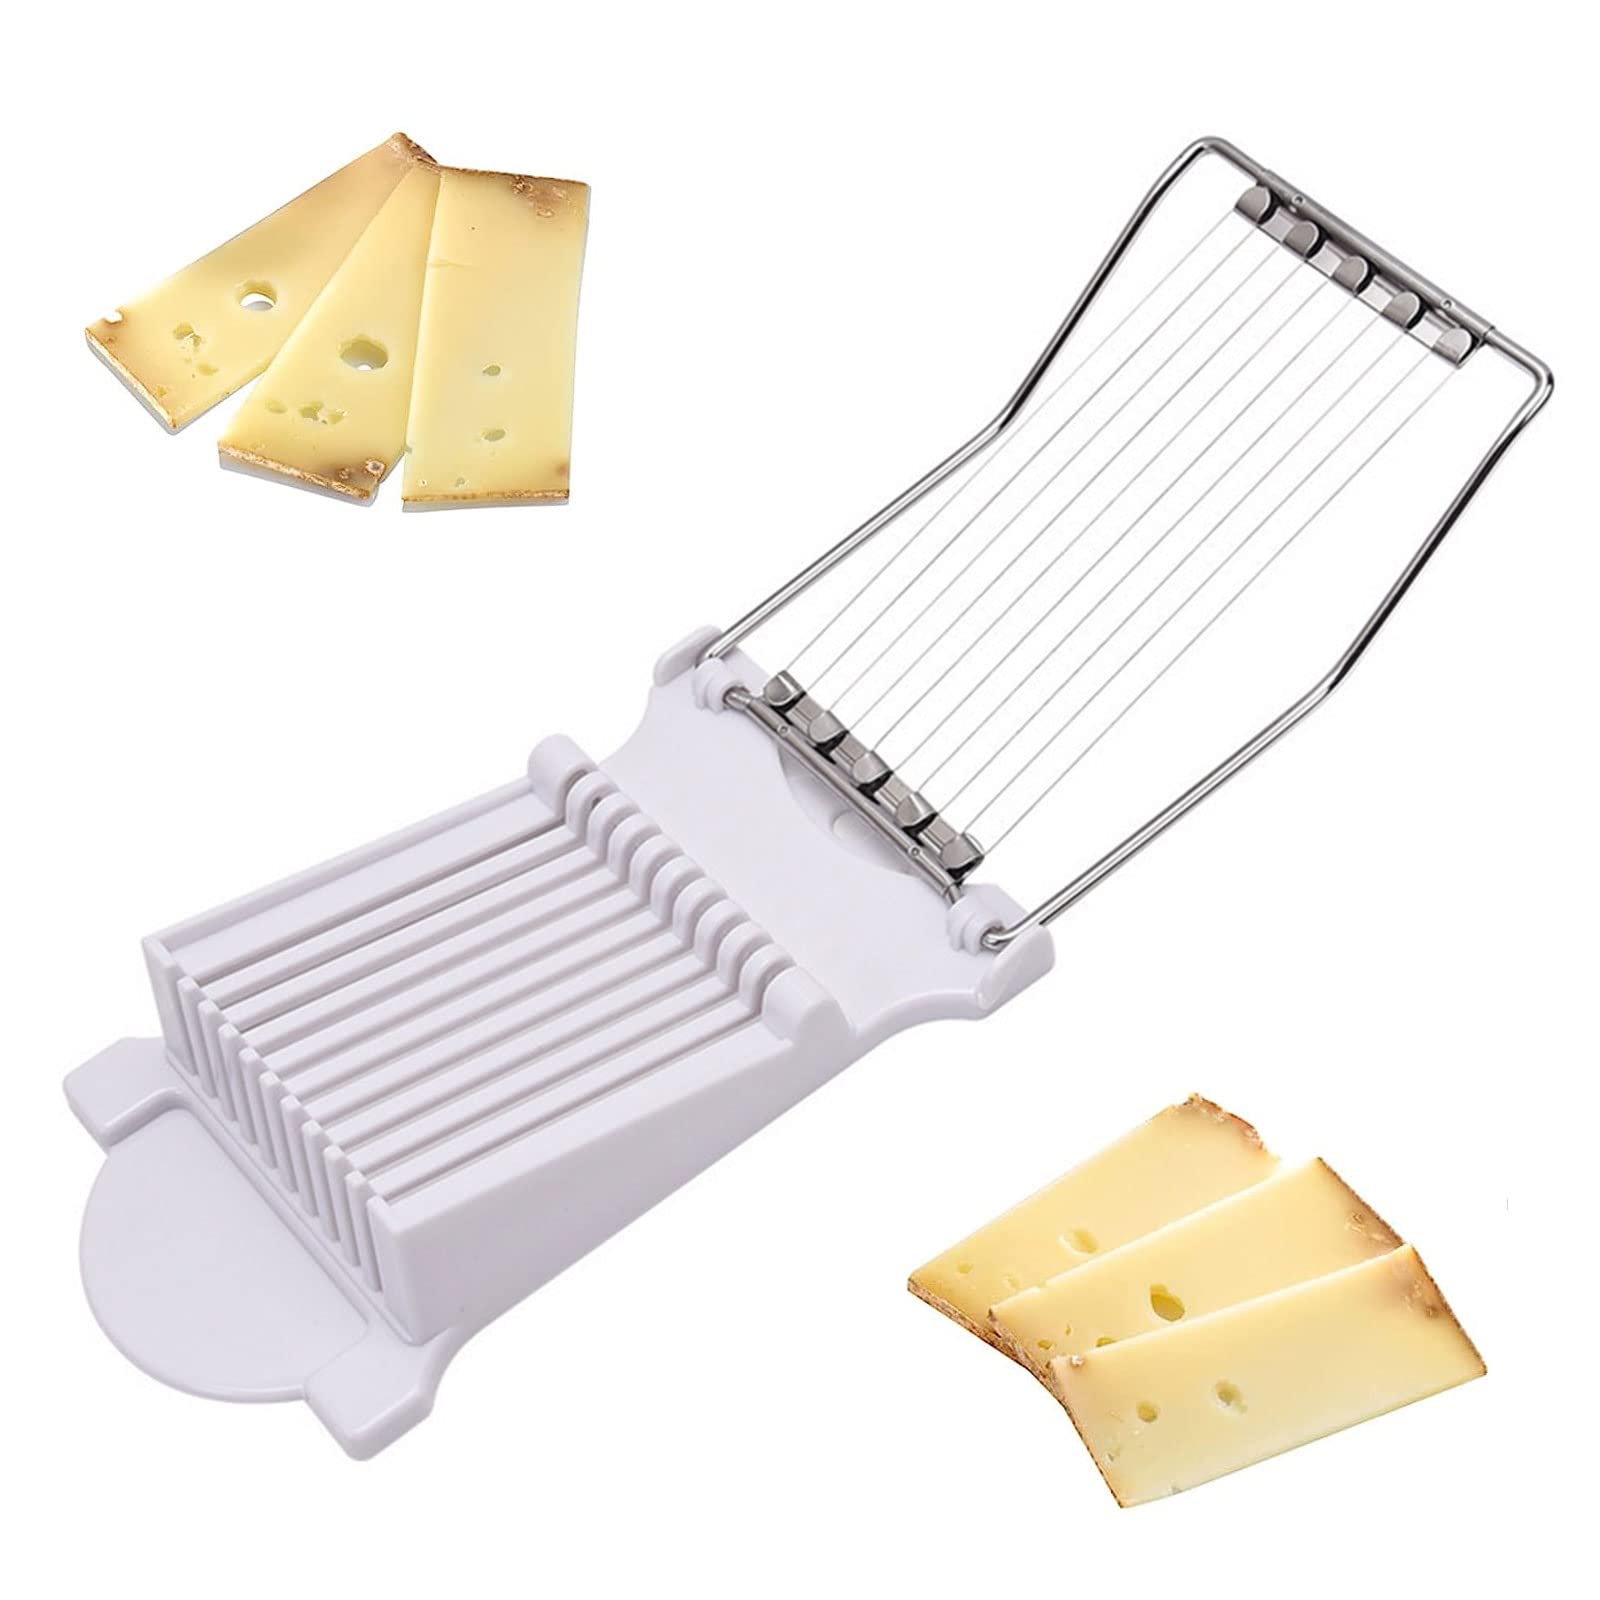 YEJAHY 16-Pack Cheese Slicer Replacement Stainless Steel Wire for Slicing Cheese, Butter, and Meat, 5.7 Inch Long Cheese Slicing Wire